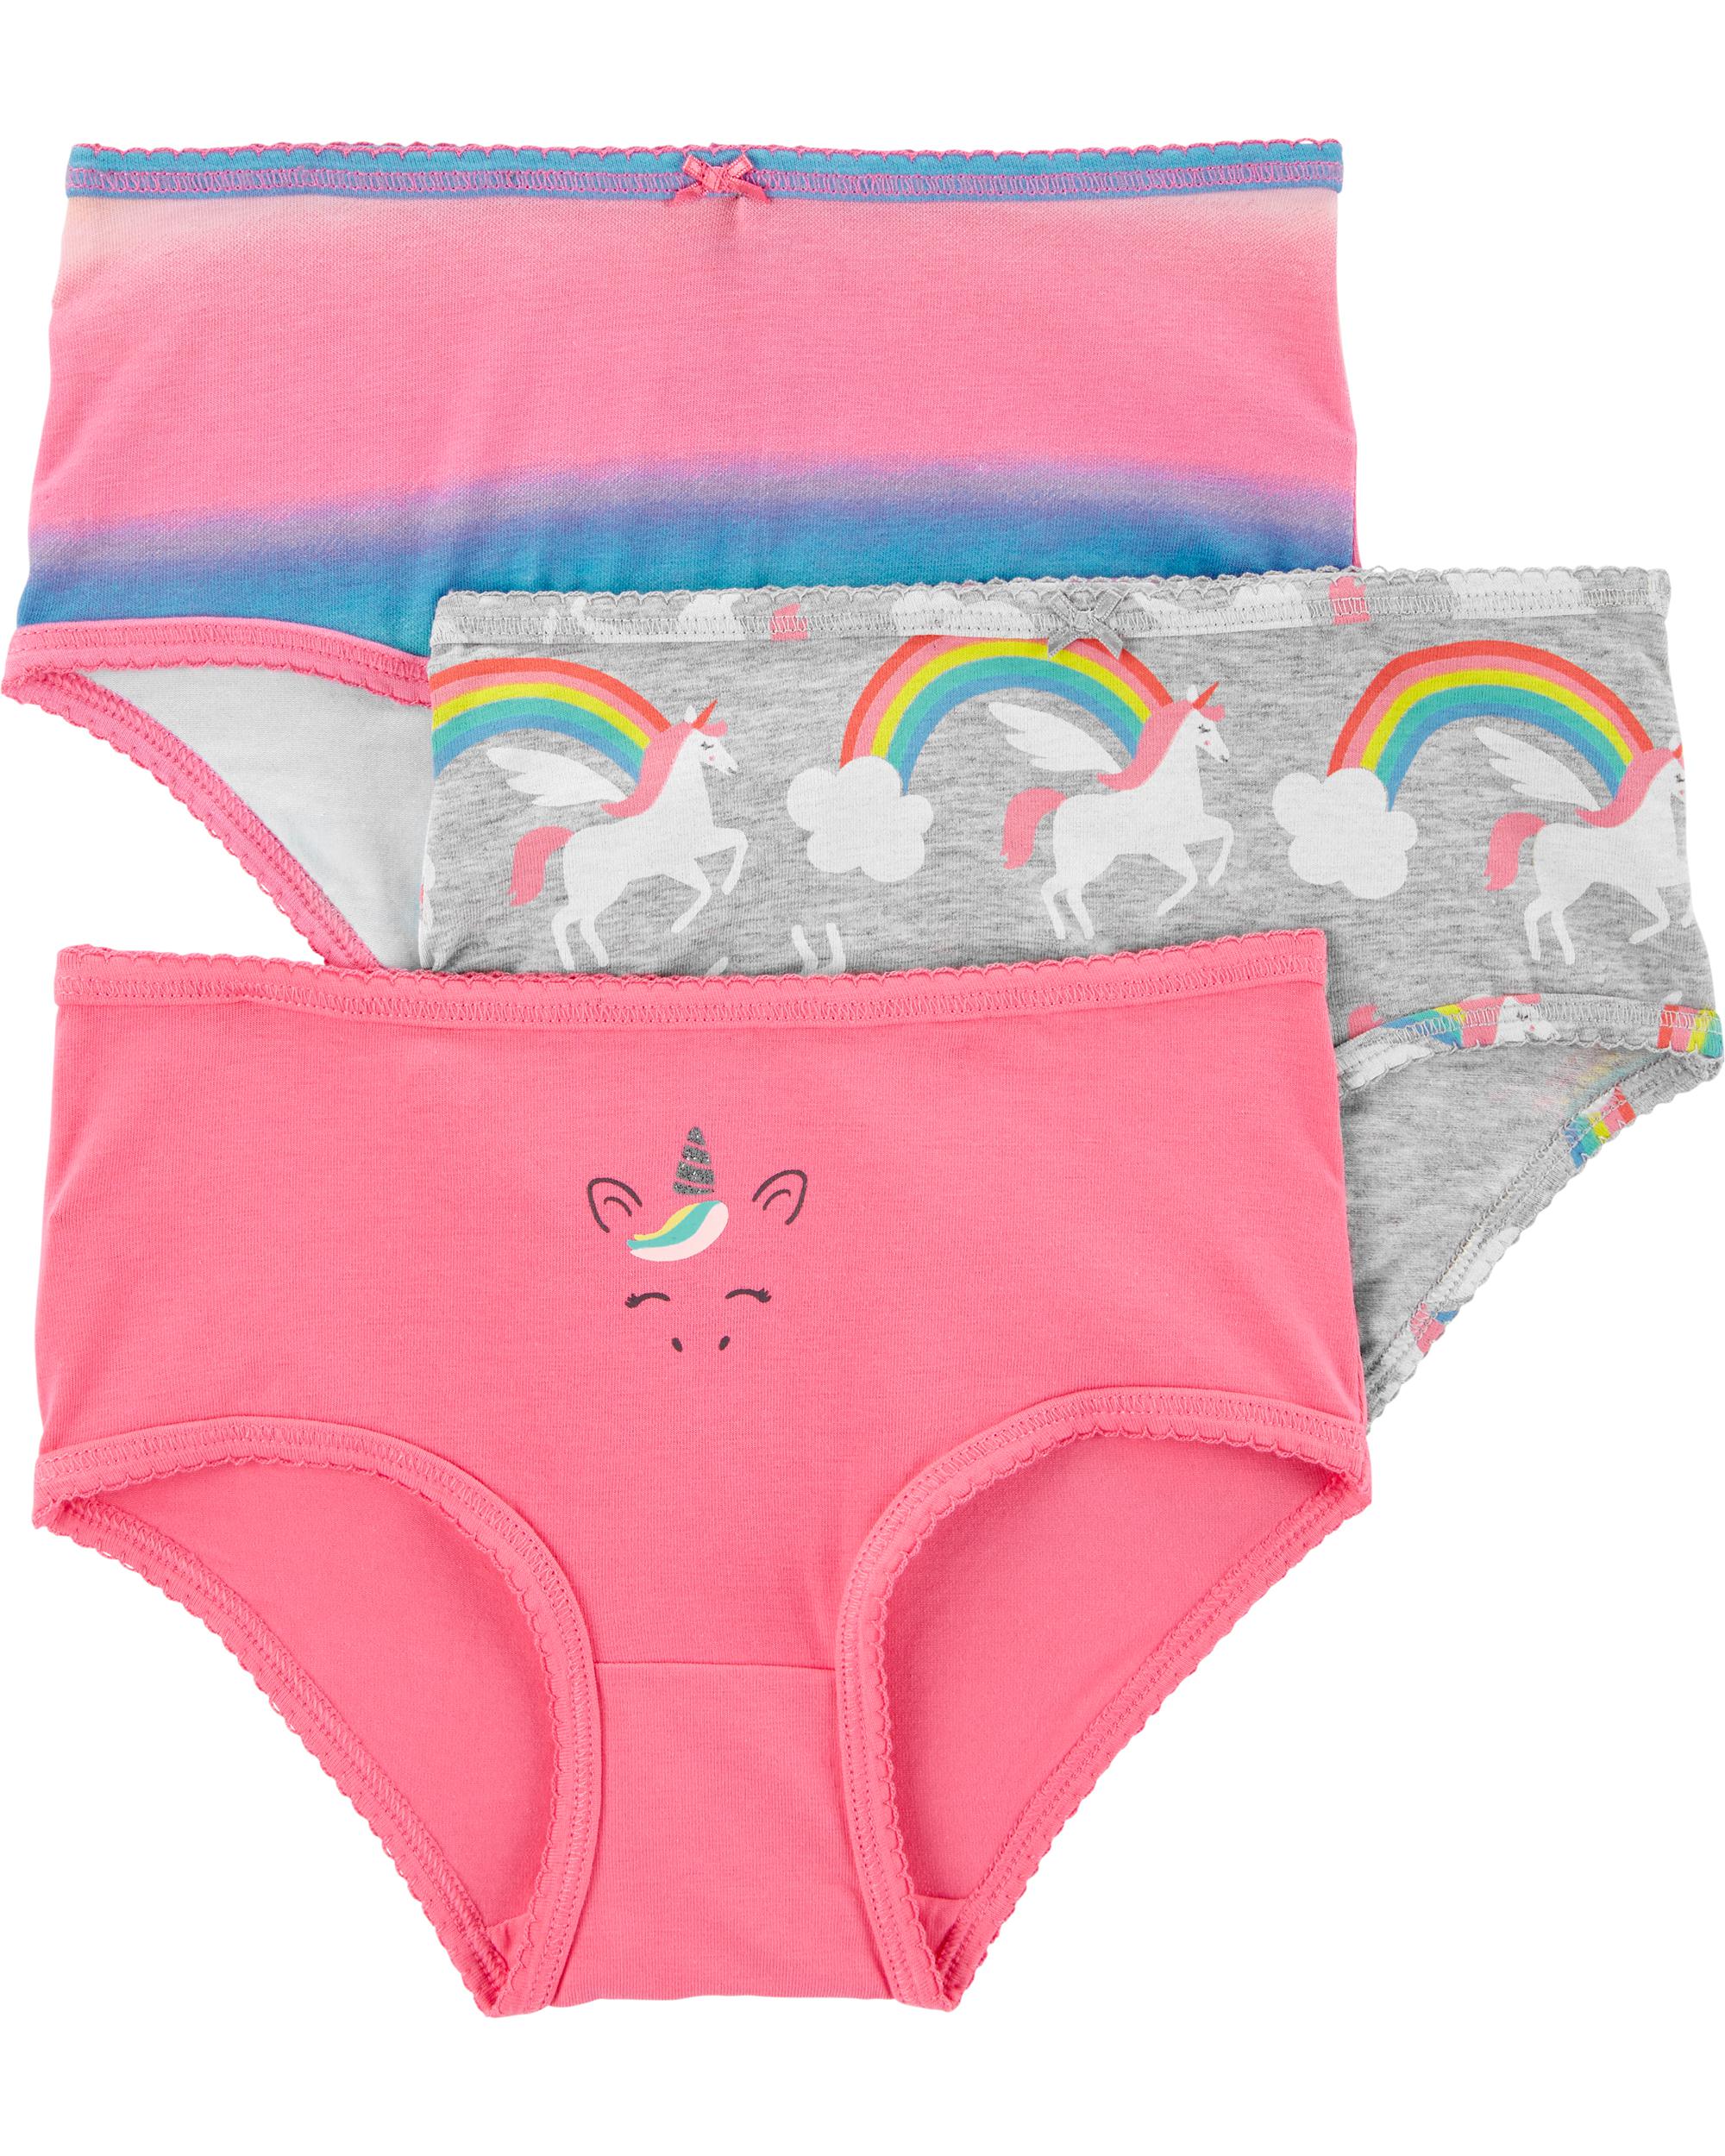 Toddler Size 2T/3T White, Pink & Blue Briefs With Coloring Page, 5